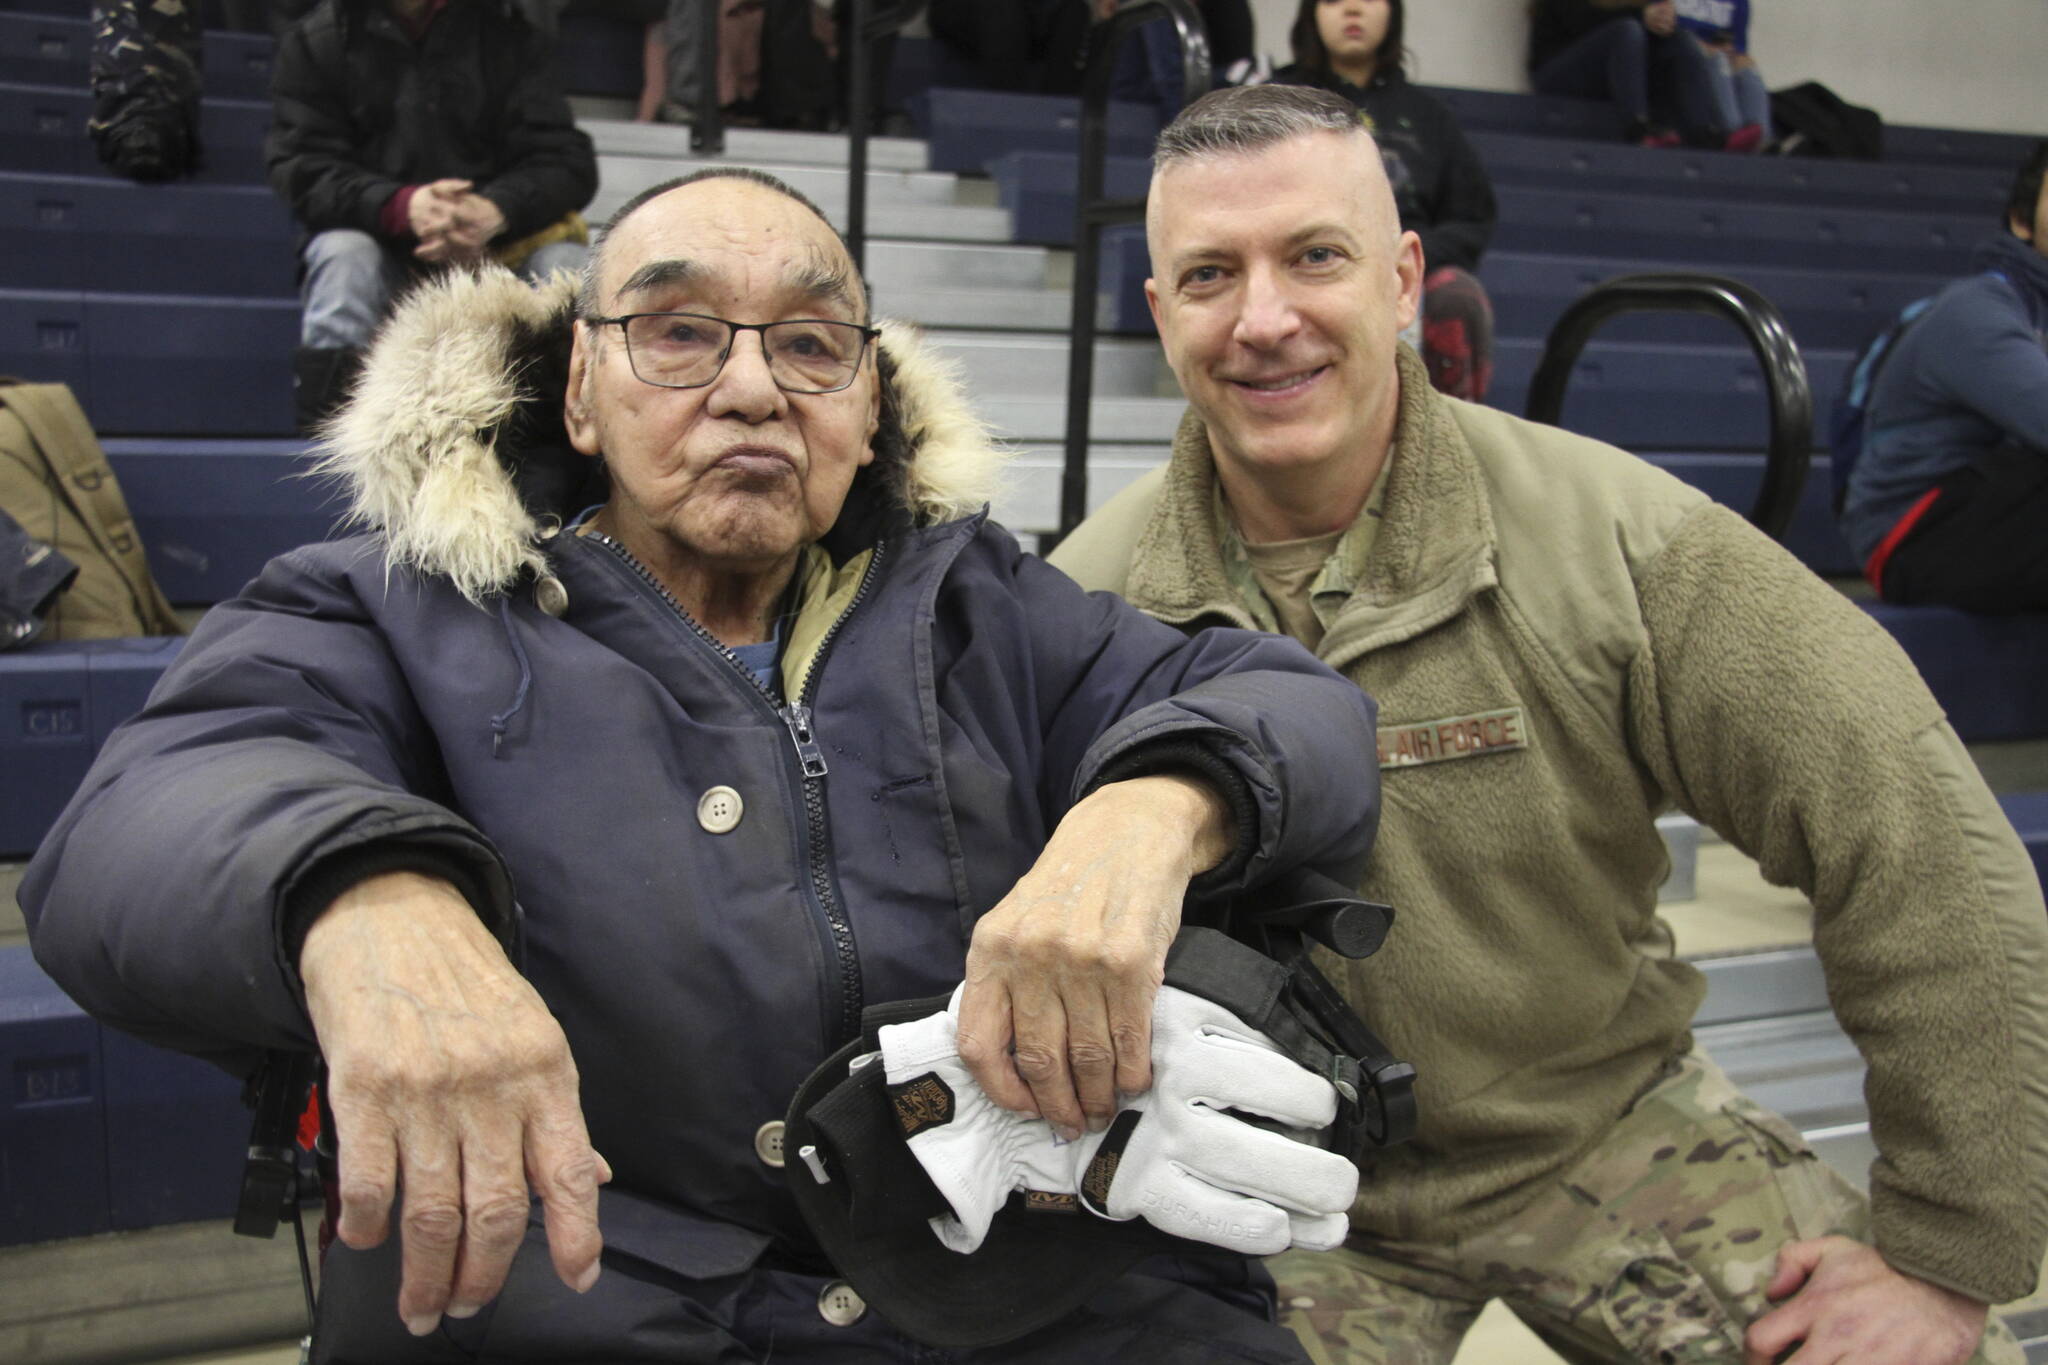 This March 28, 2023, photo shows Bruce Boolowon, left, posing with Maj. Gen. Torrence Saxe, the adjutant general of the Alaska National Guard, during a ceremony in Gambell, Alaska. Saxe presented Alaska Heroism Medals to Boolowon, the last surviving guardsman who helped rescue 11 Navy crewmen after they crash landed on St. Lawrence Island on June 22, 1955, and to the family members of 15 other guardsman who are now deceased. (AP Photo/Mark Thiessen)